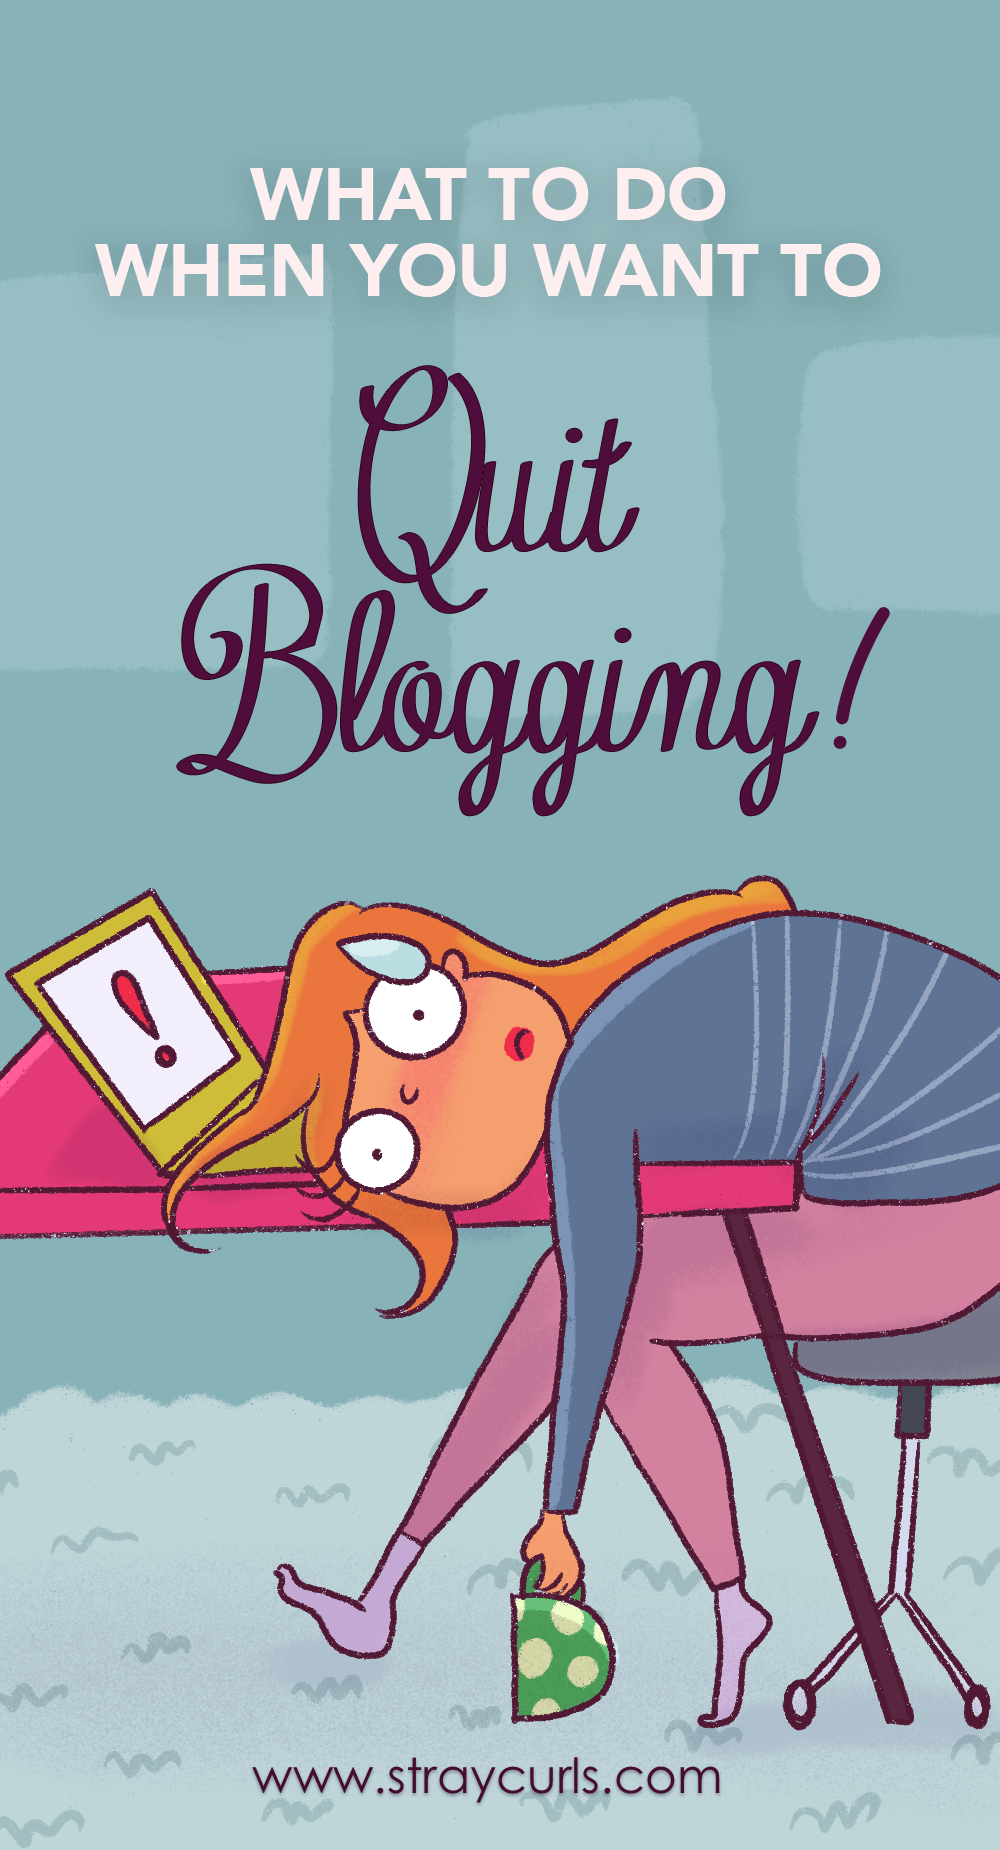 Stressed about your blog going nowhere? Overwhelemed and tired about your Blog? I got you covered. Learn how to beat blogging burnout and get inspired so you can start a blog and get over blogger's anxiety! #blogging #bloggingtips